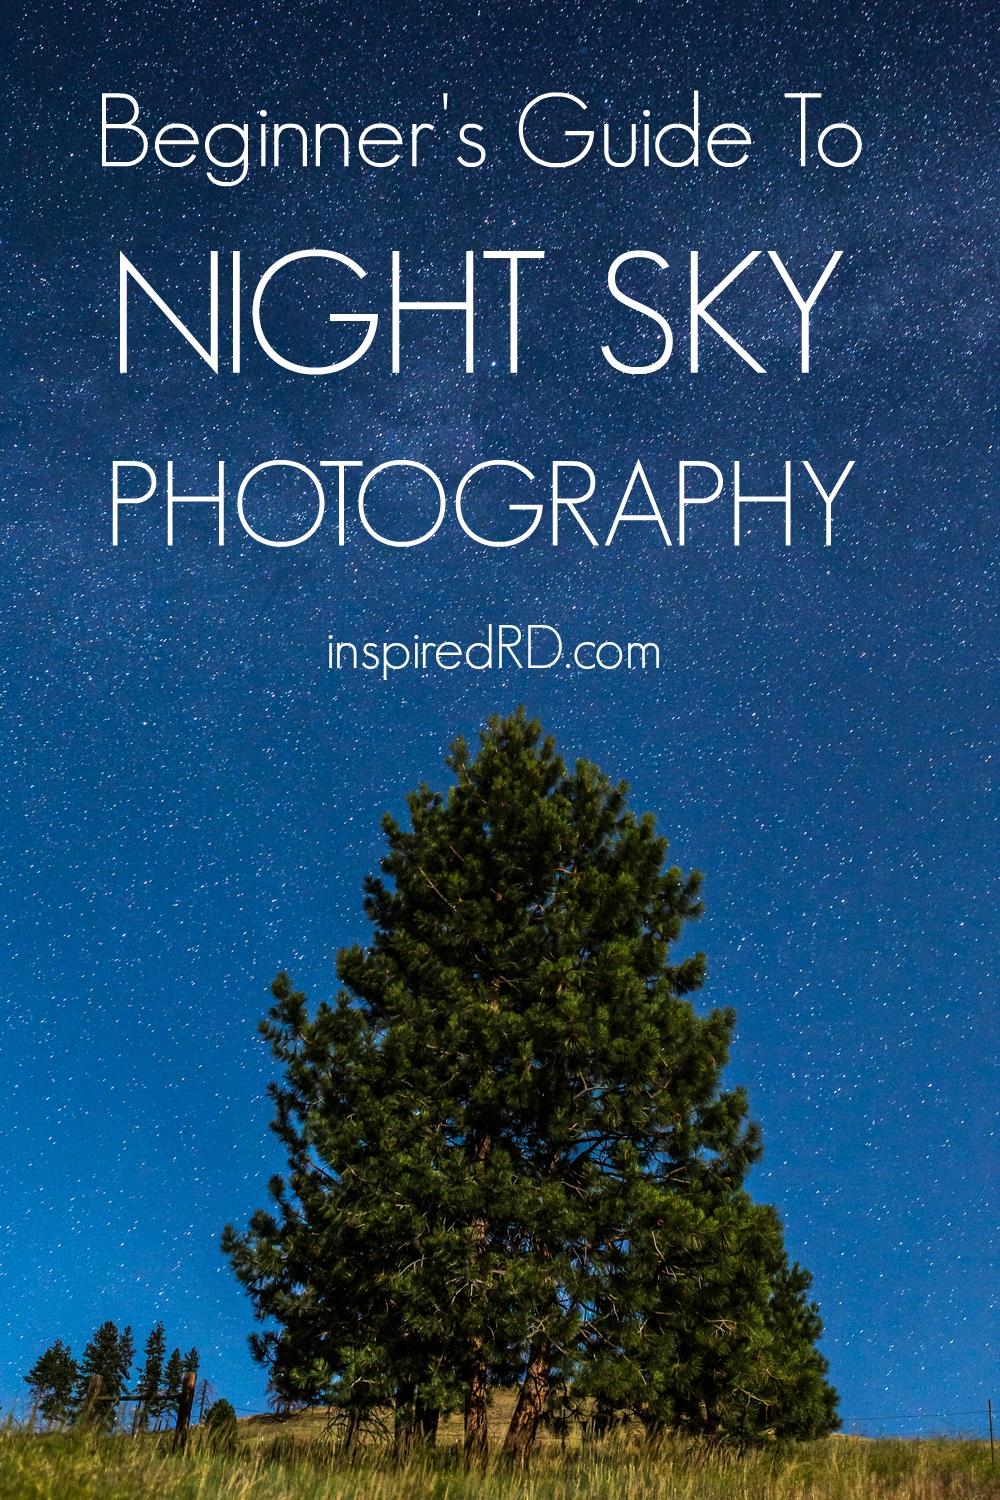 Beginner's Guide to Night Sky Photography | InspiredRD.com